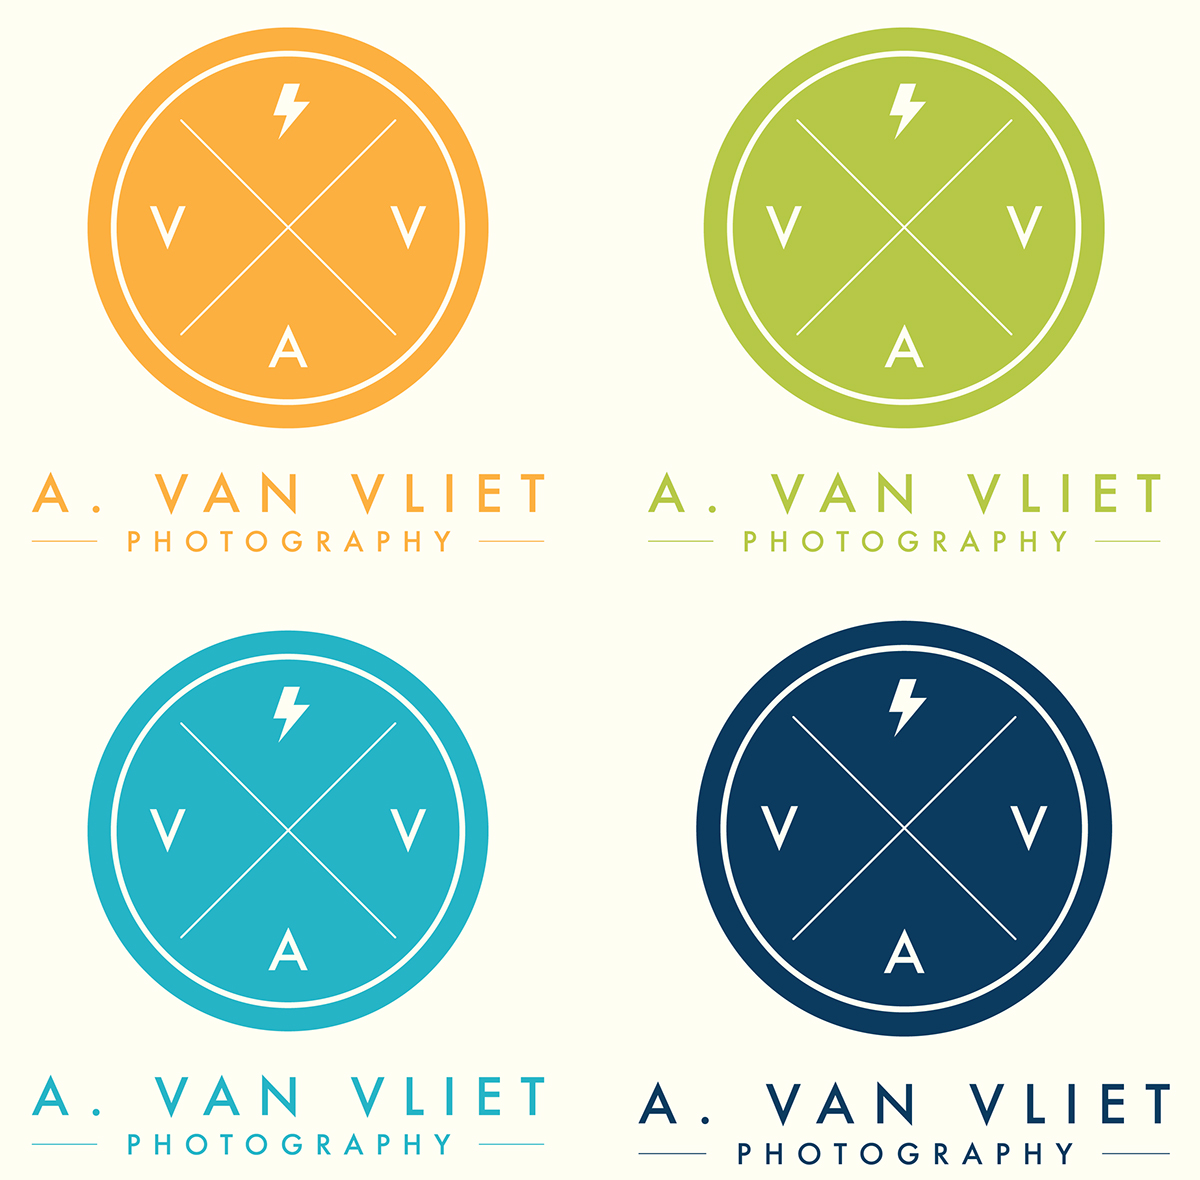 A. Van Vliet Boise Photography boise idaho photography logos photography watermark Hipster Logos hipster style stamp logos Wood Textured Logos